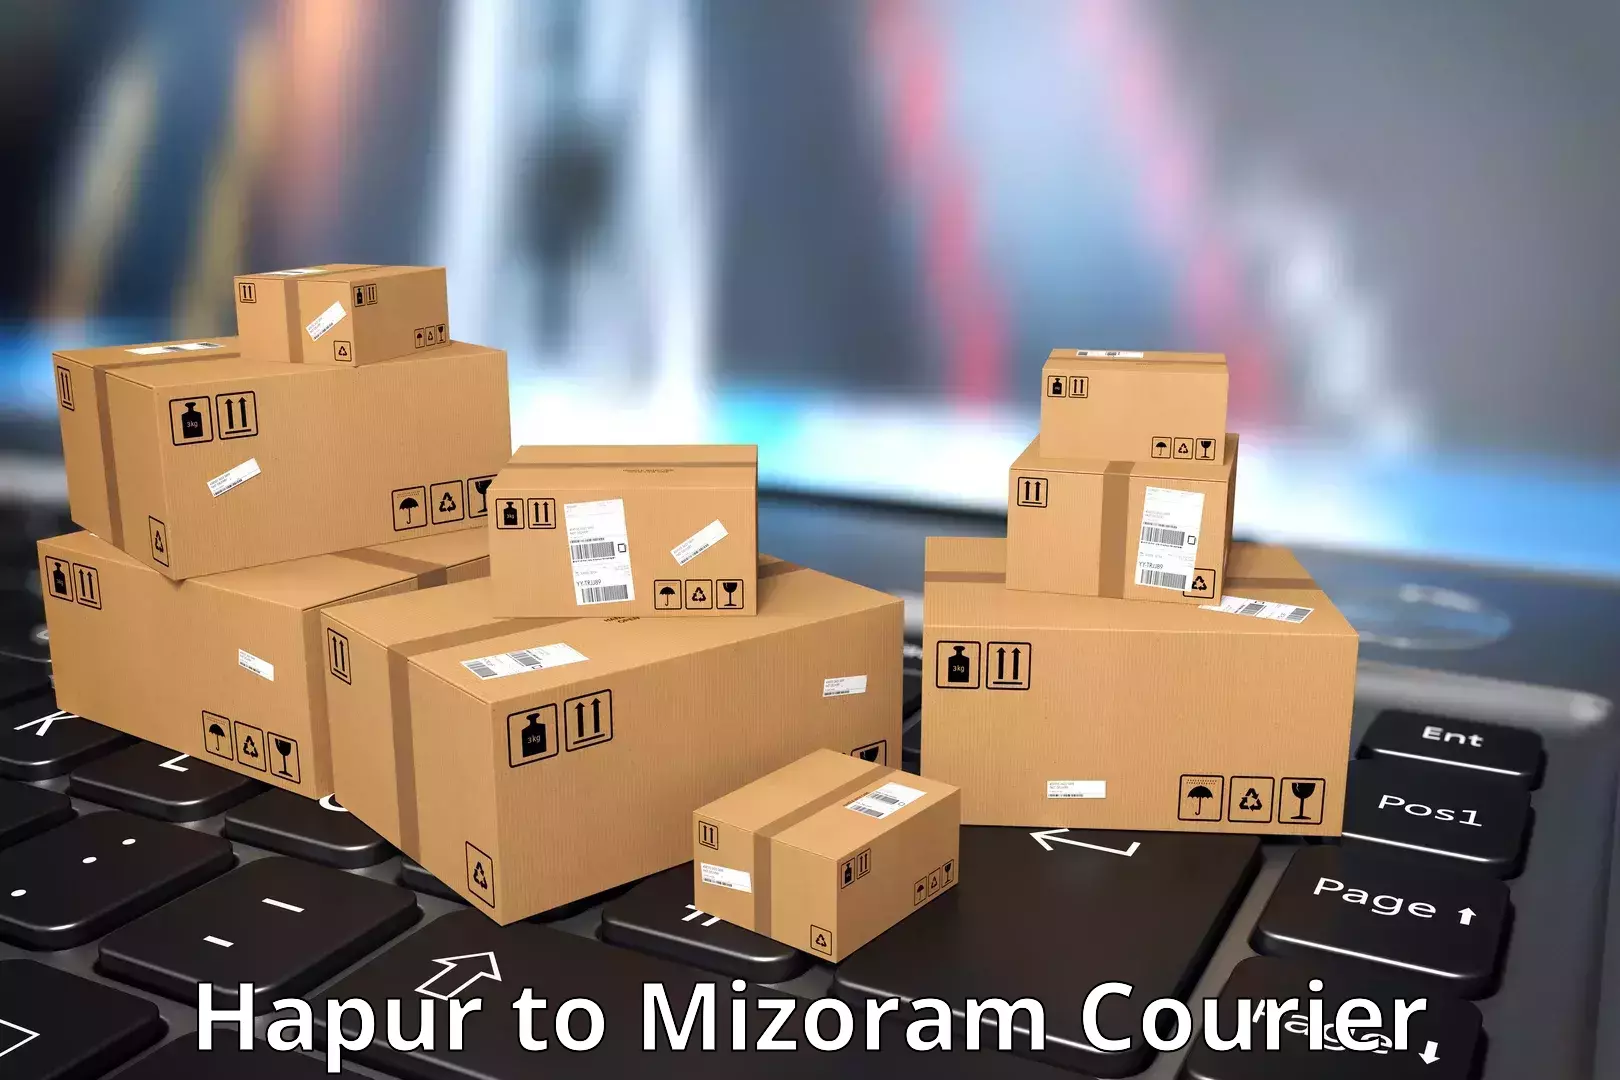 Medical delivery services Hapur to Mizoram